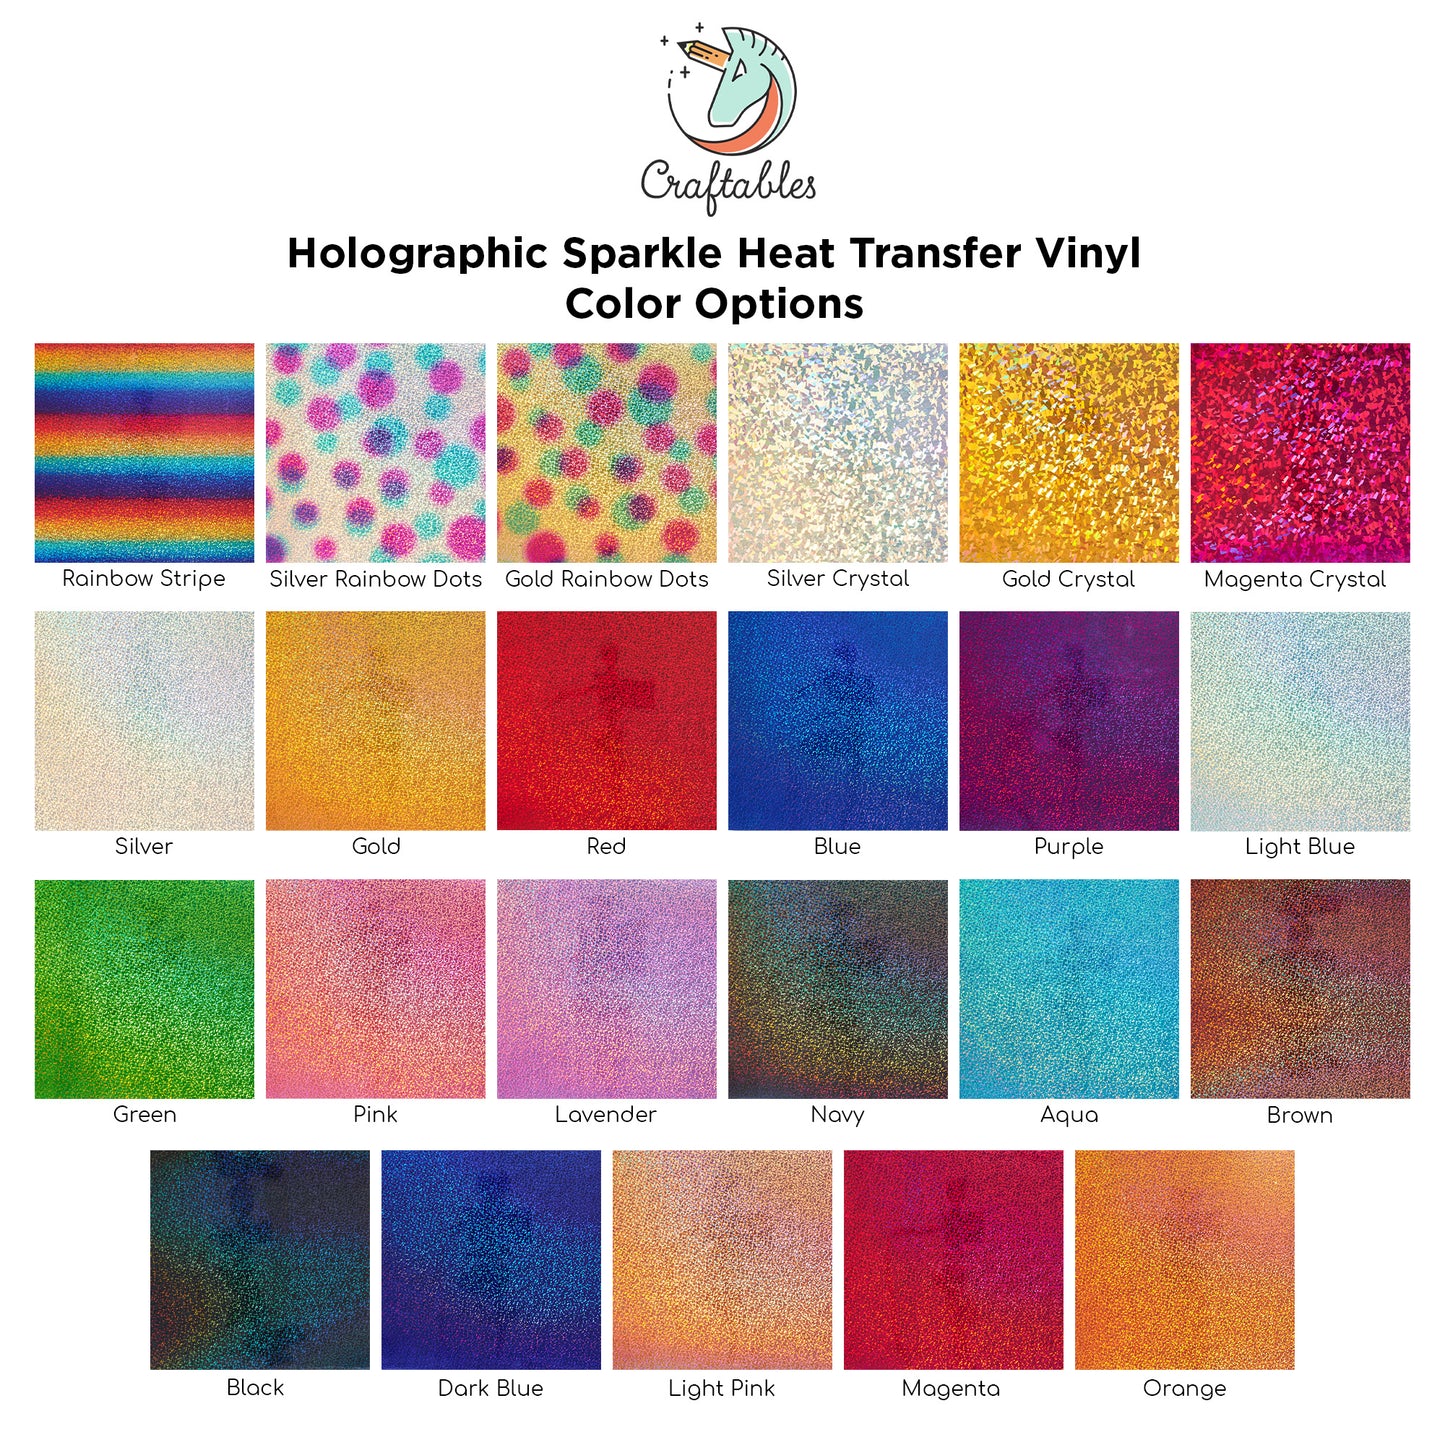 Green Holographic Sparkle Heat Transfer Vinyl Sheets By Craftables